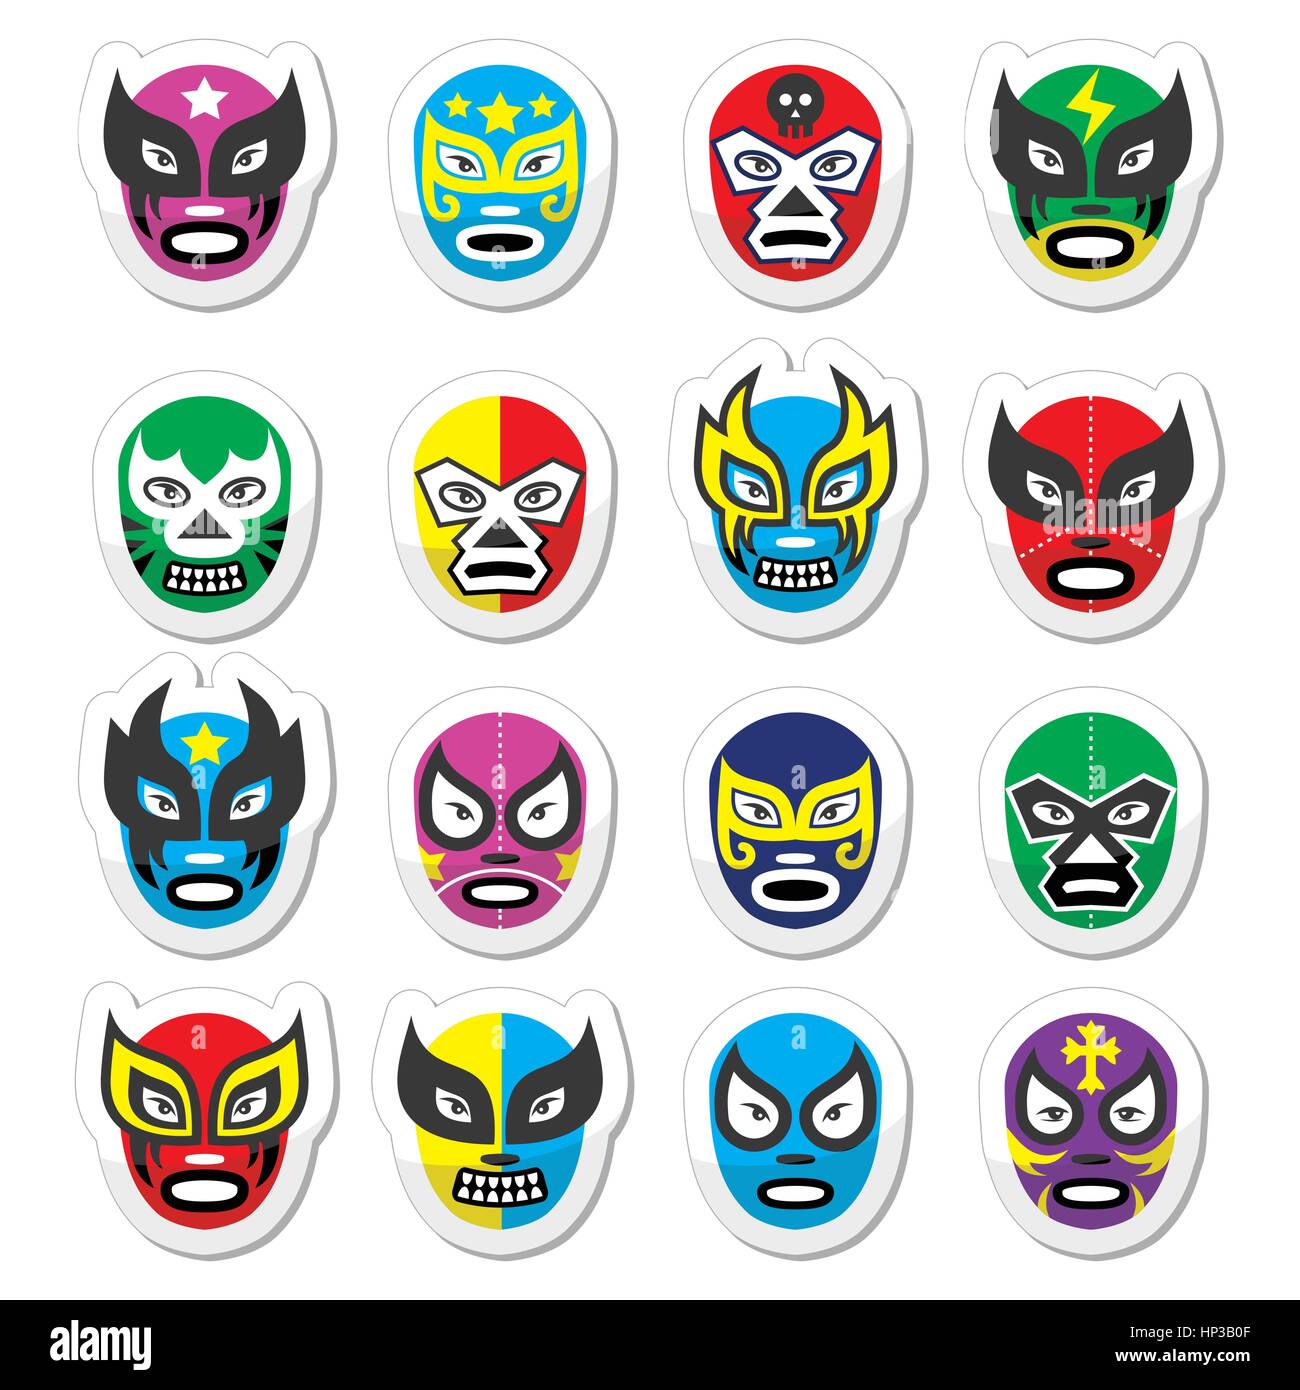 Lucha libre, luchador mexican wrestling masks icons. Vector icons set of masks worn during wrestling fights in Mexico isolated on white Stock Vector